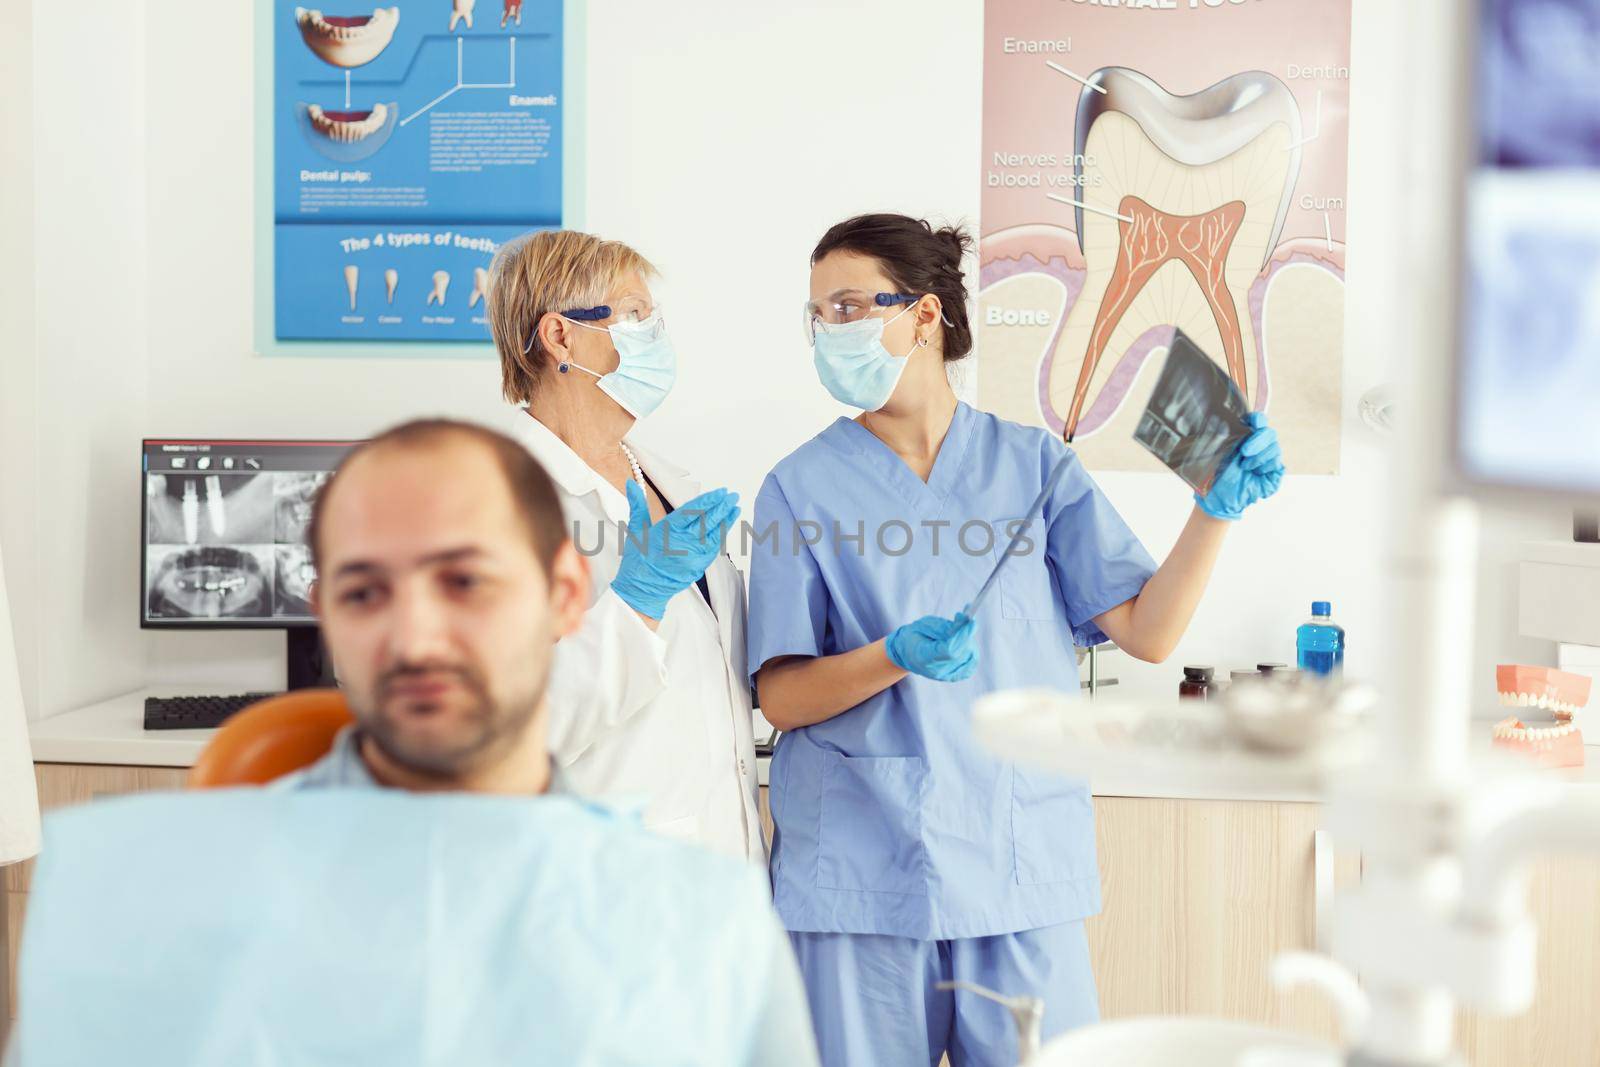 Stomatologist doctor and orthodontist assistant examining teeth radiography by DCStudio